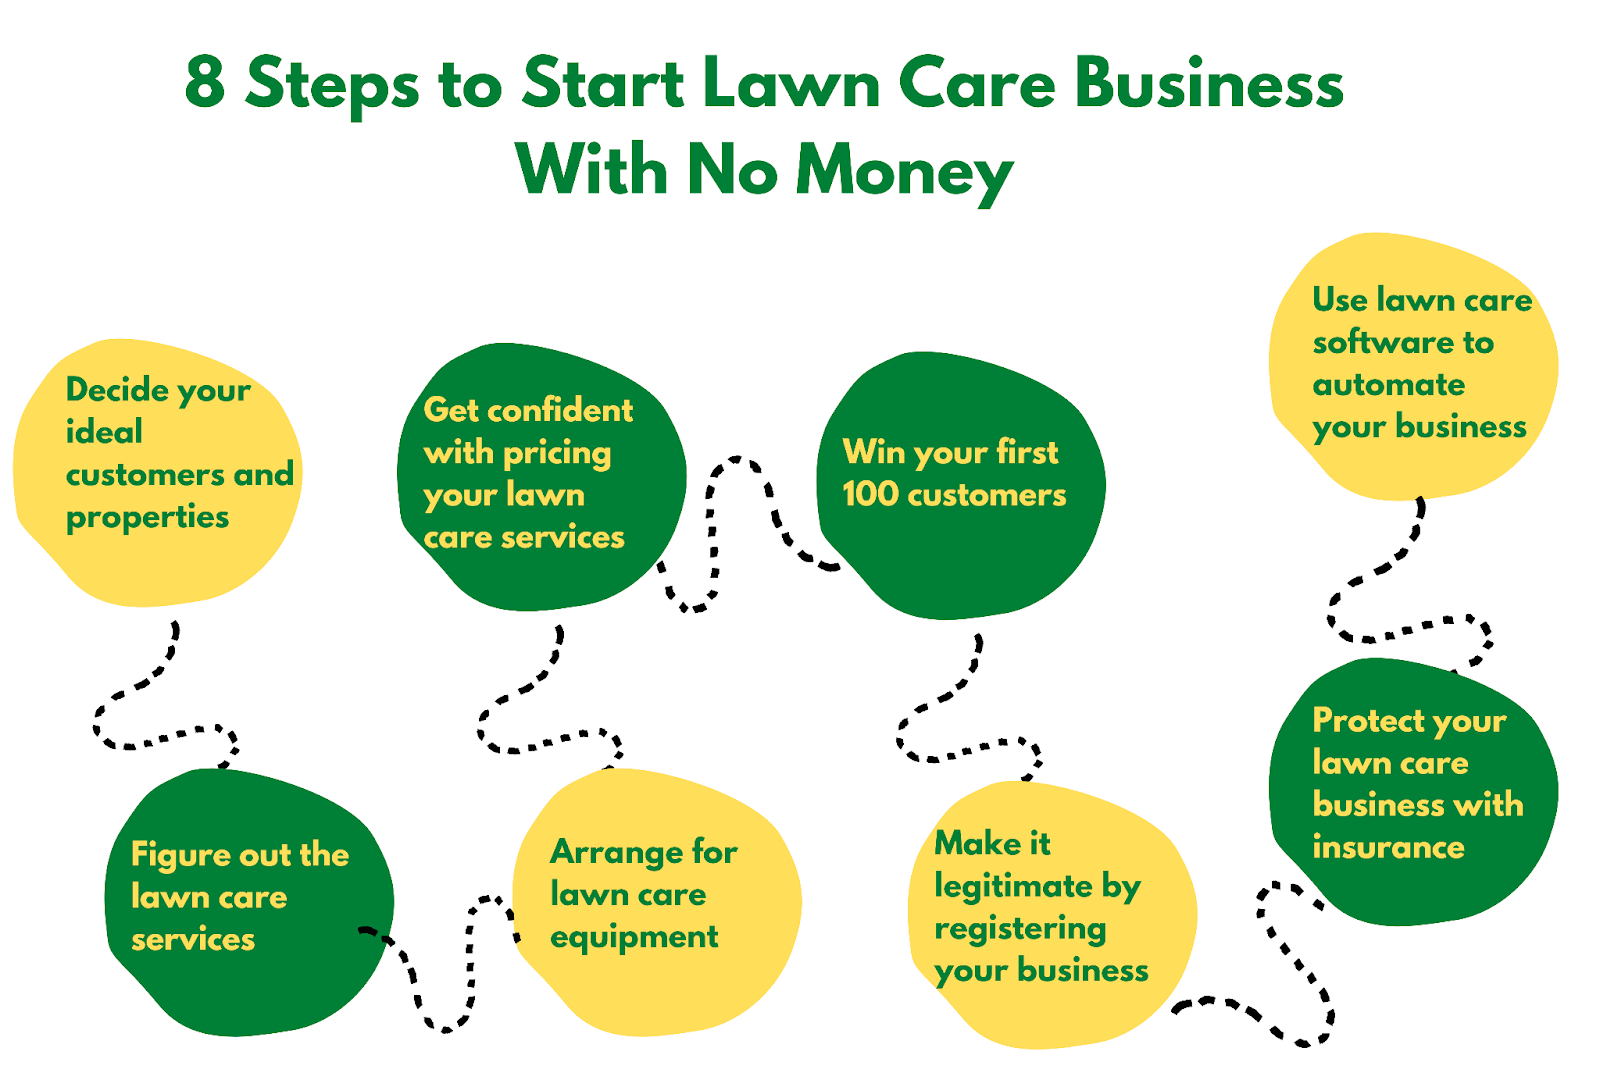 A lawn care business owner stating 8 steps to start your lawn care business with no money 